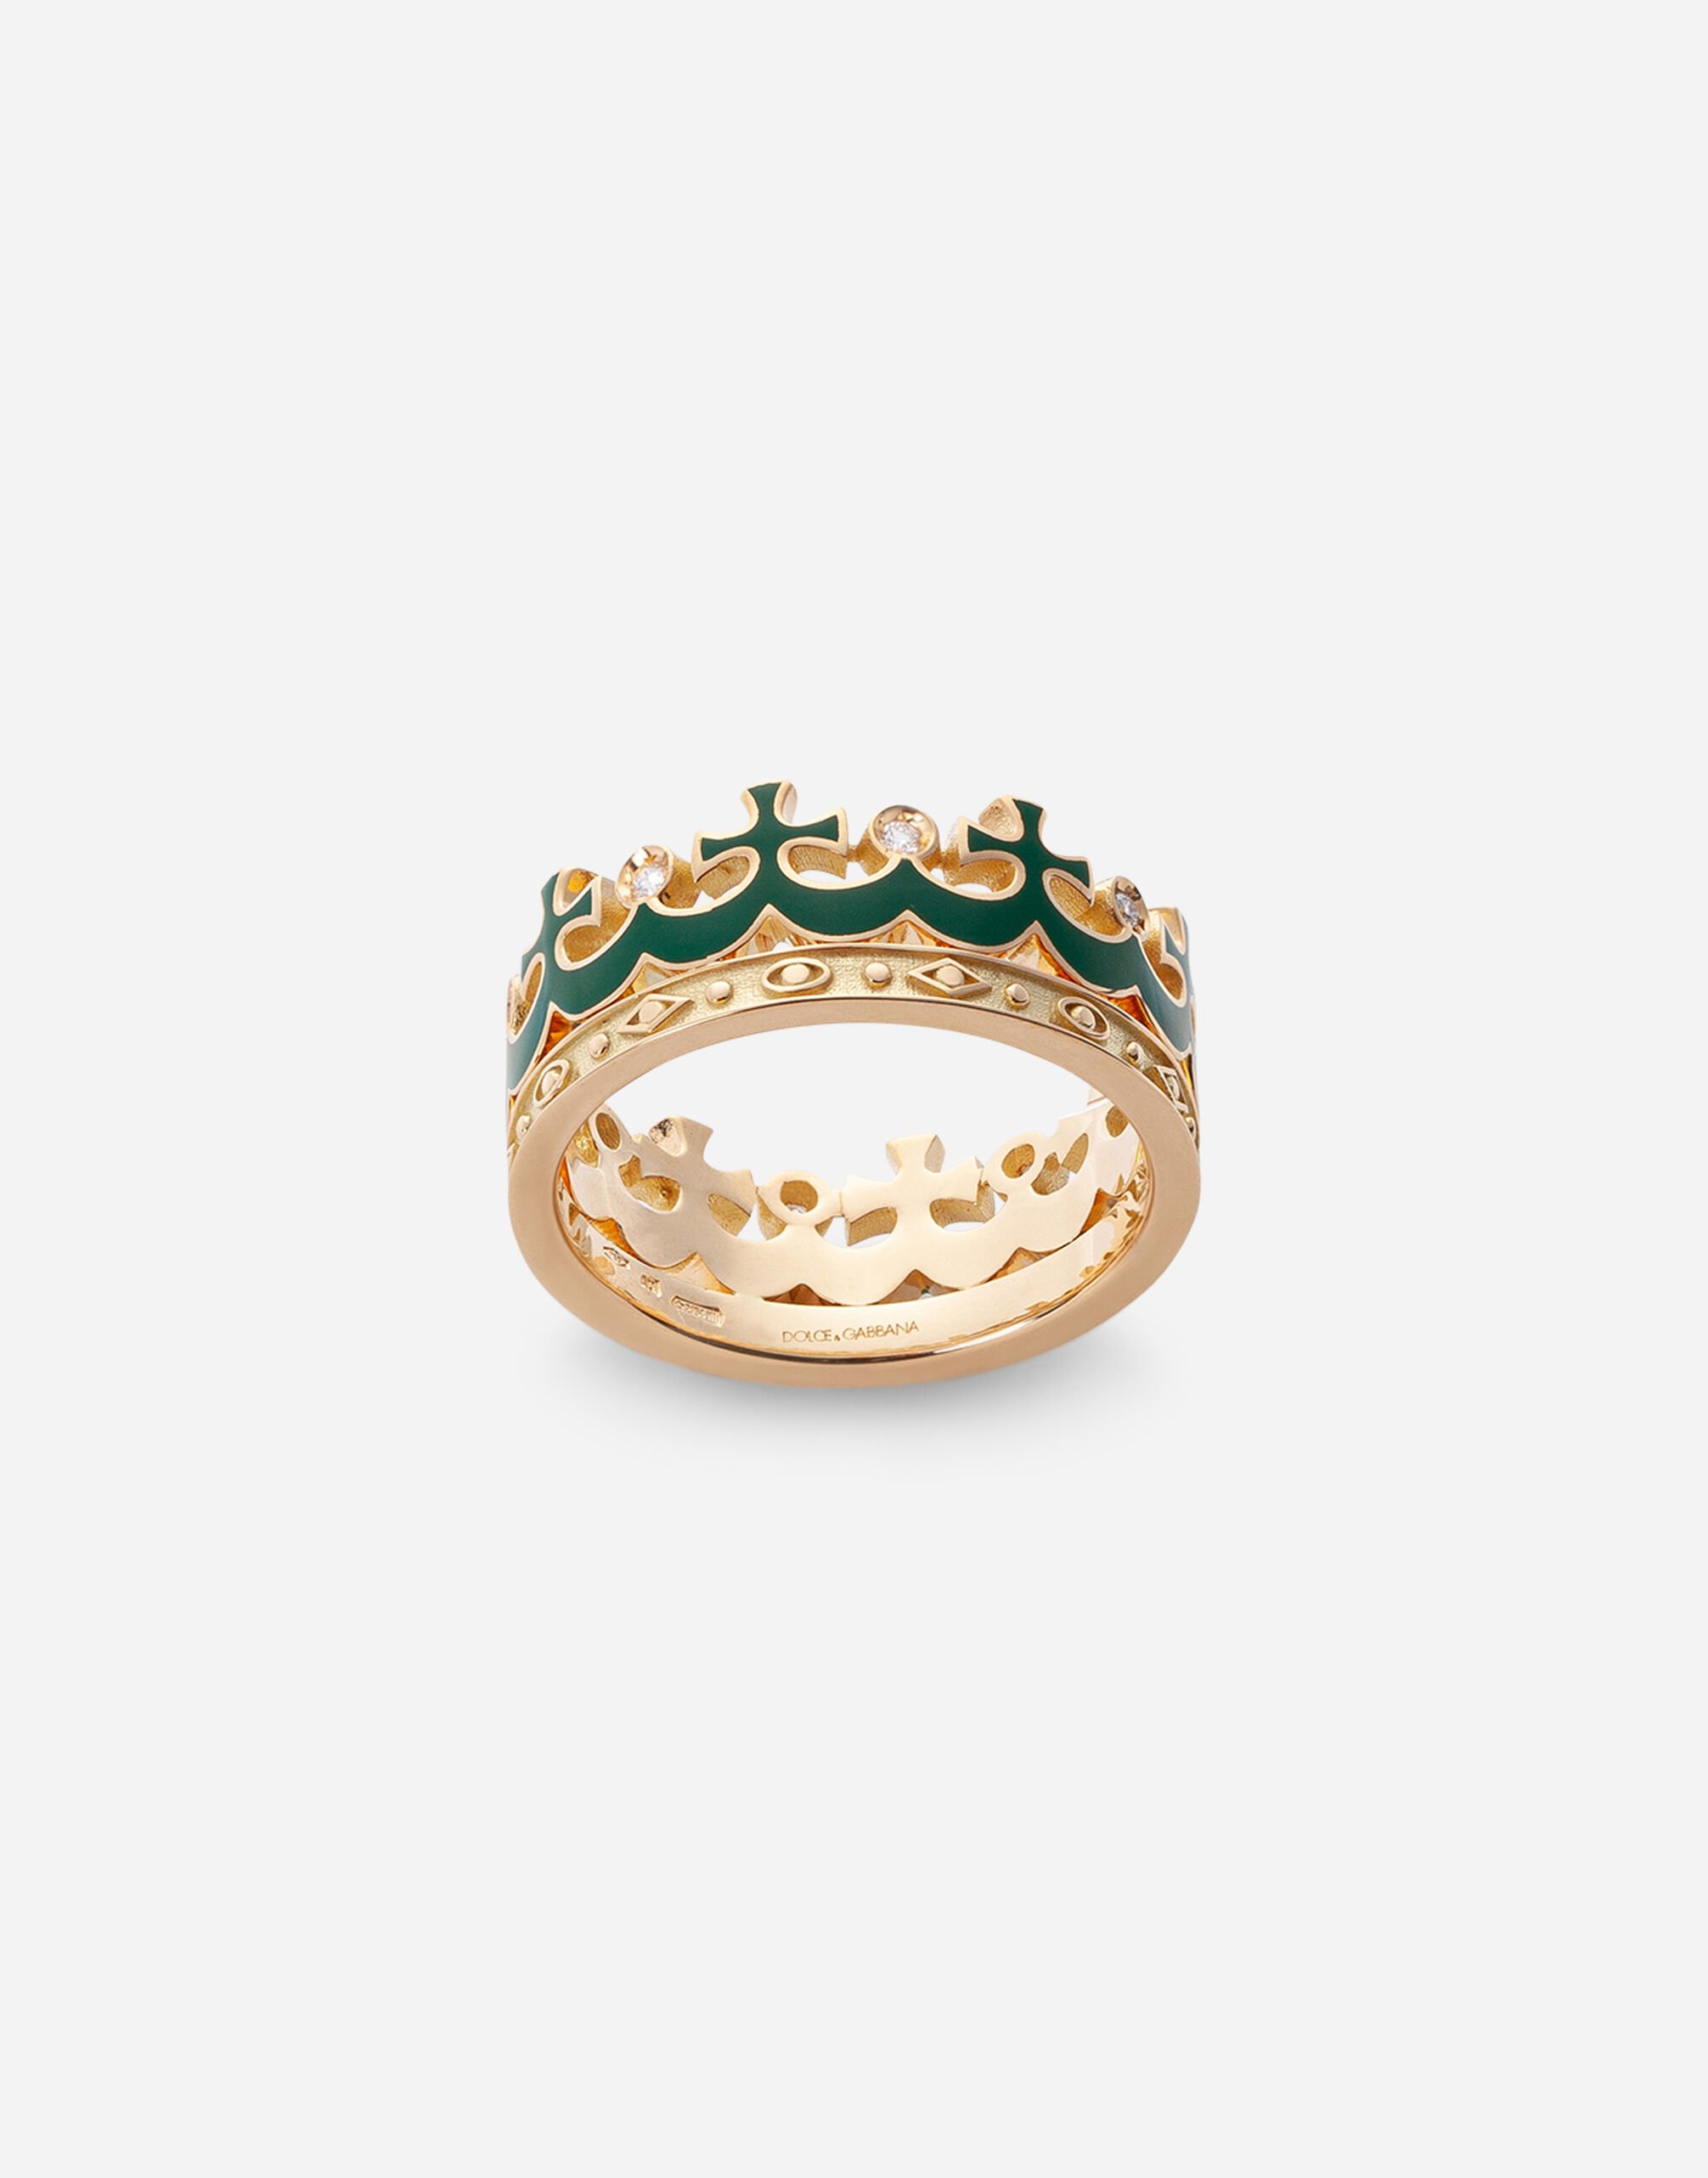 Dolce & Gabbana Crown yellow gold ring with green enamel crown and diamonds Gold WRLK1GWIE01